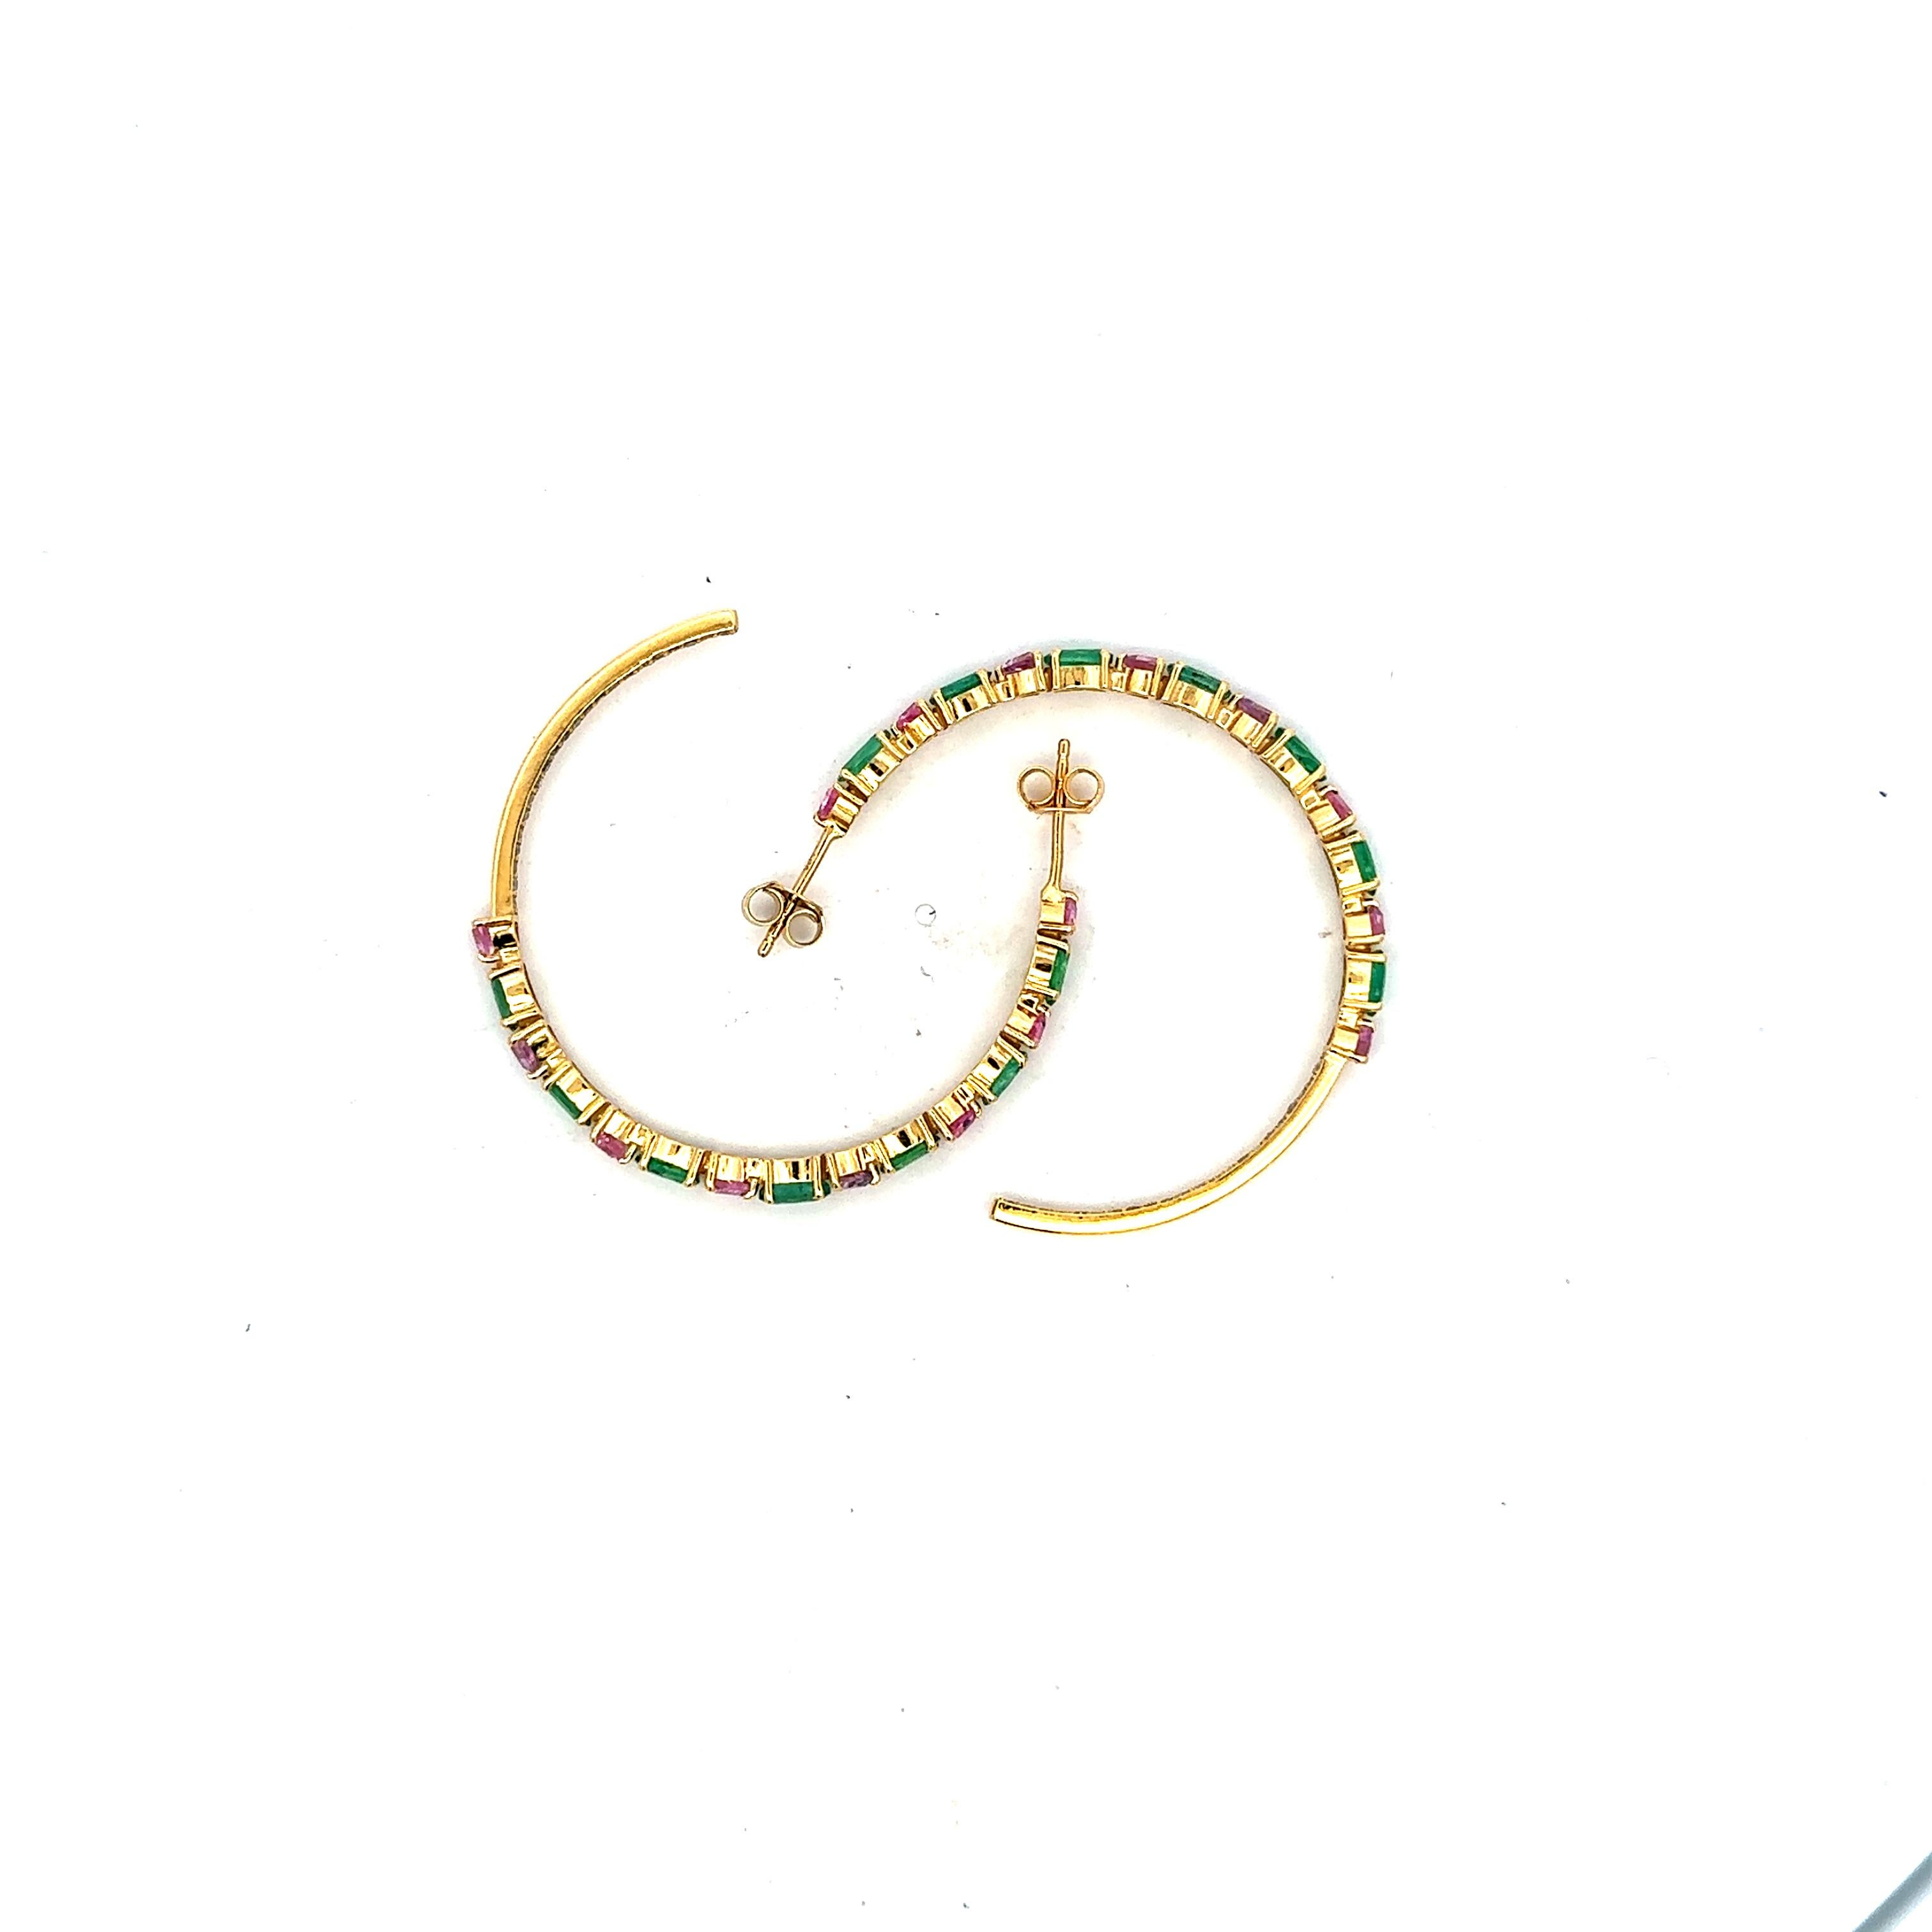 Statement Fine Diamond Emerald and Sapphire Hoop Earrings 14k Solid Yellow Gold im Angebot 1